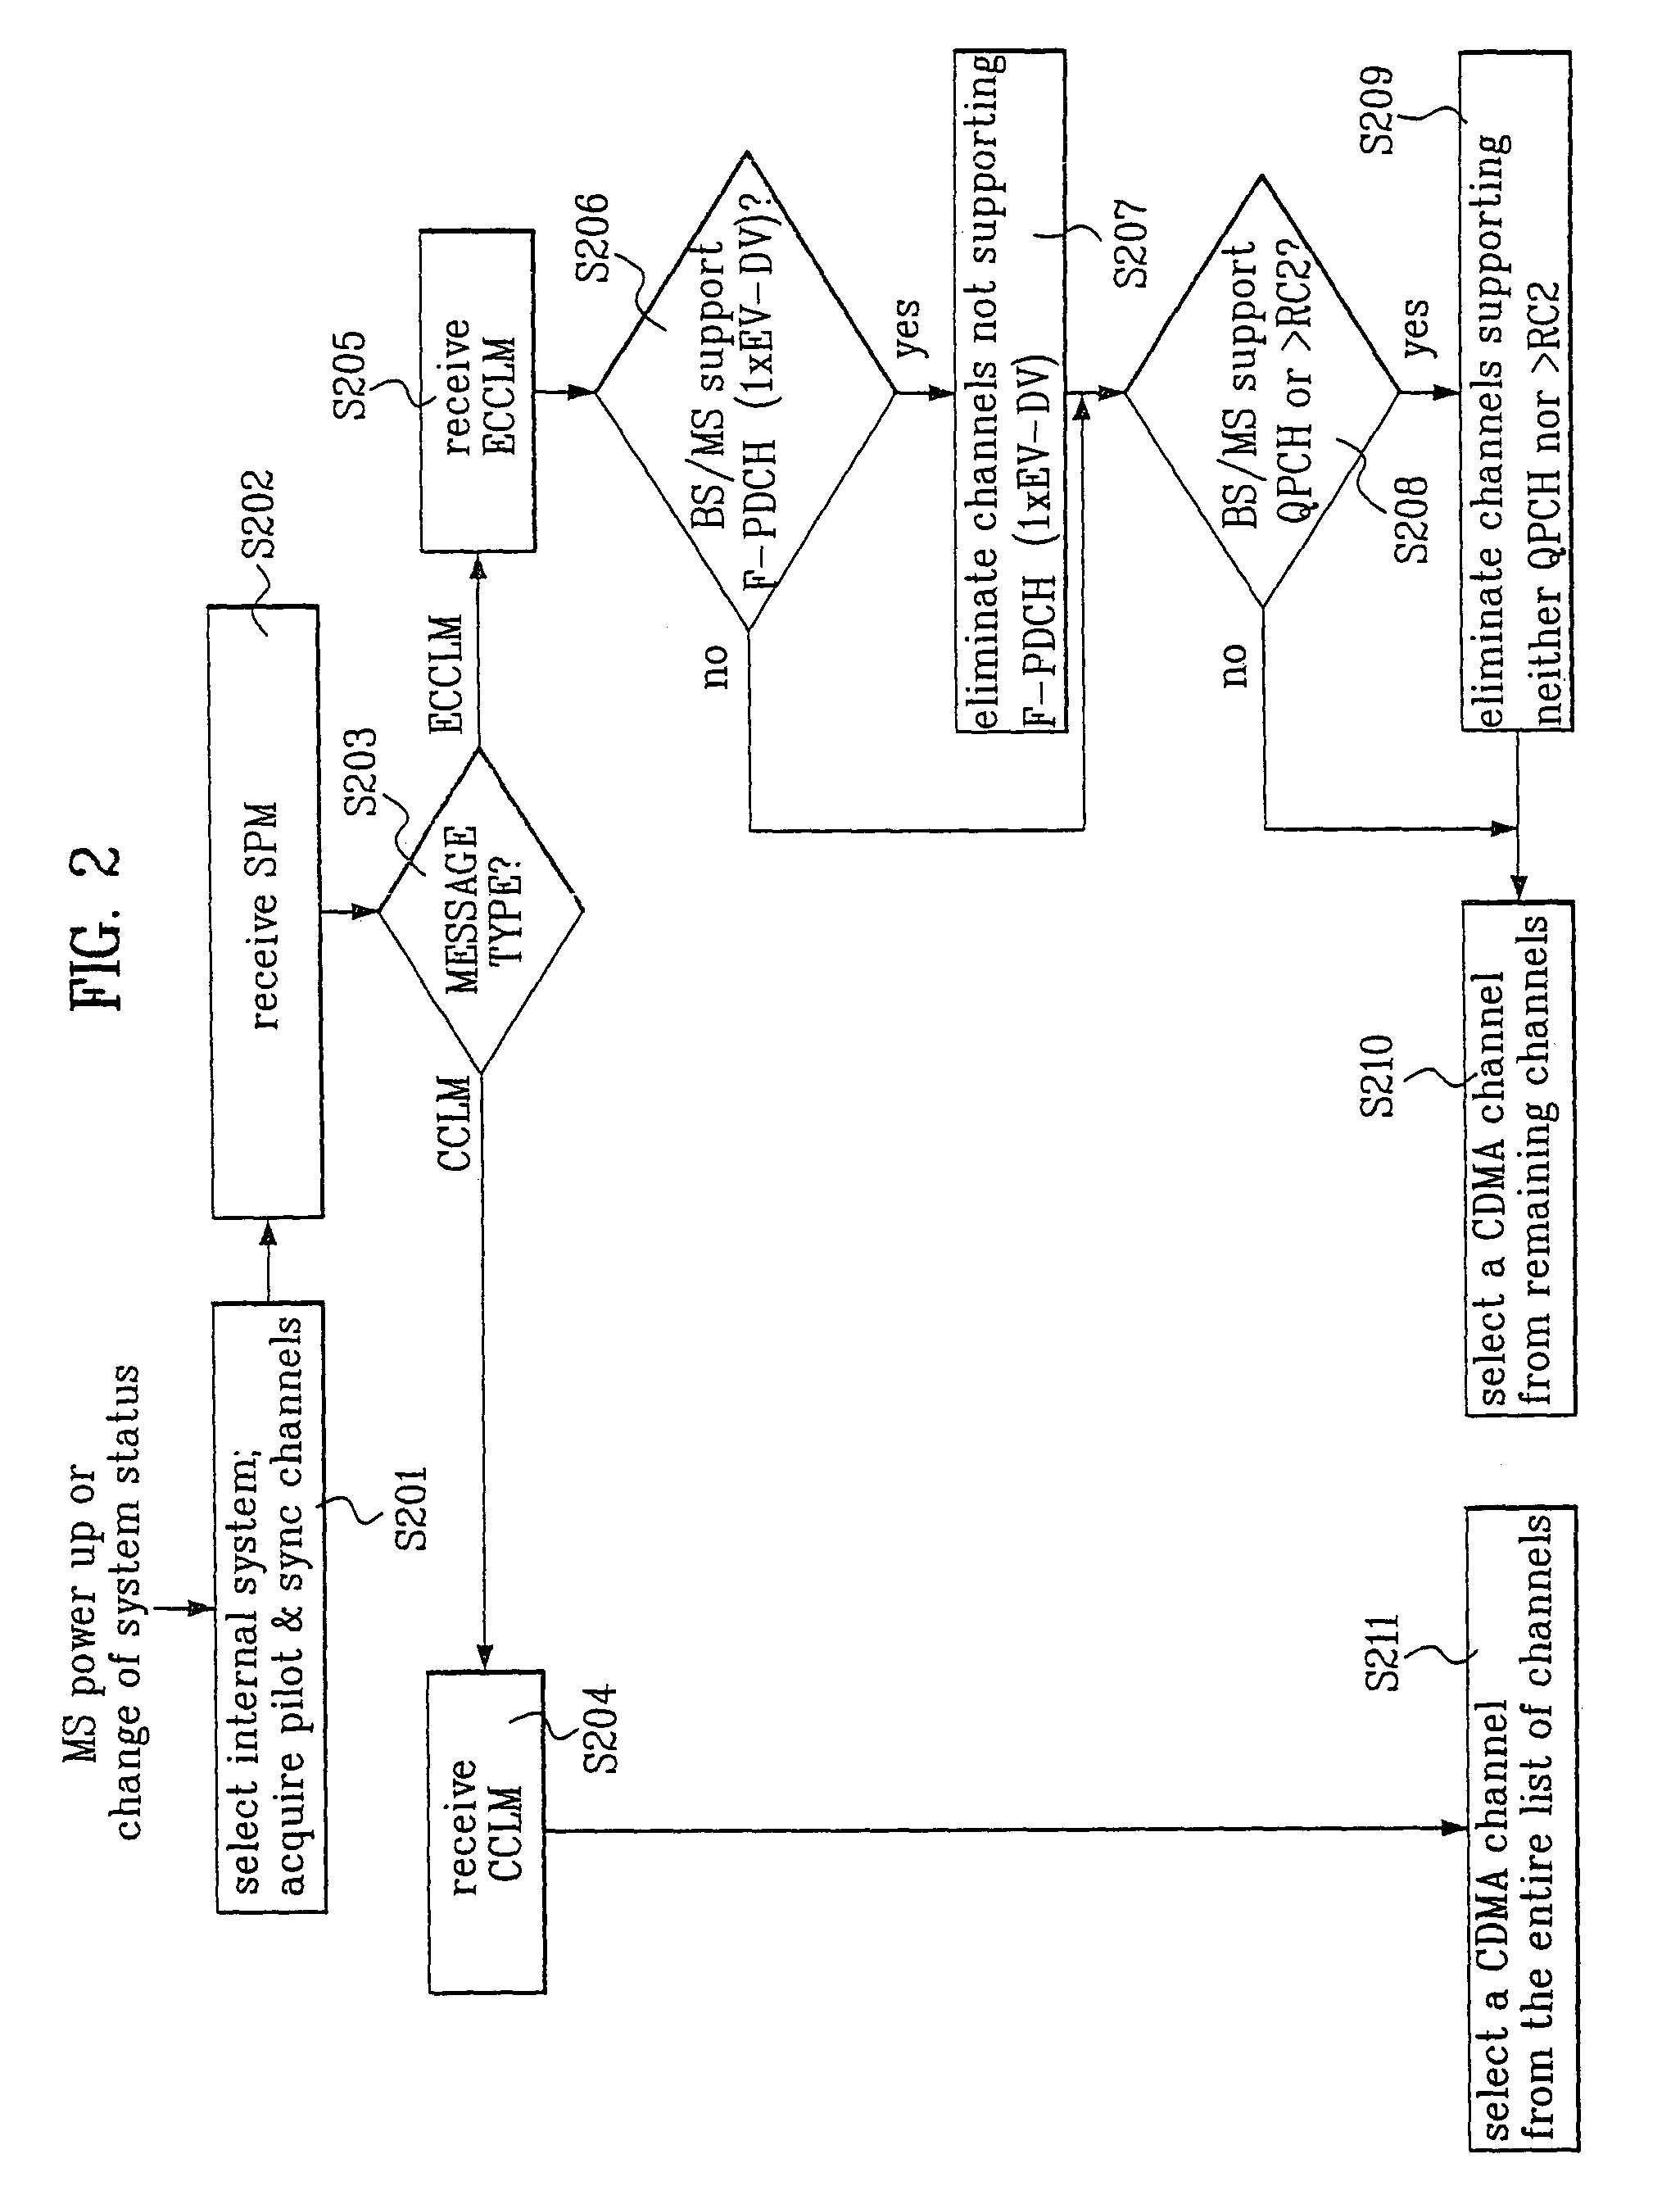 Overhead message and channel hashing method using the same